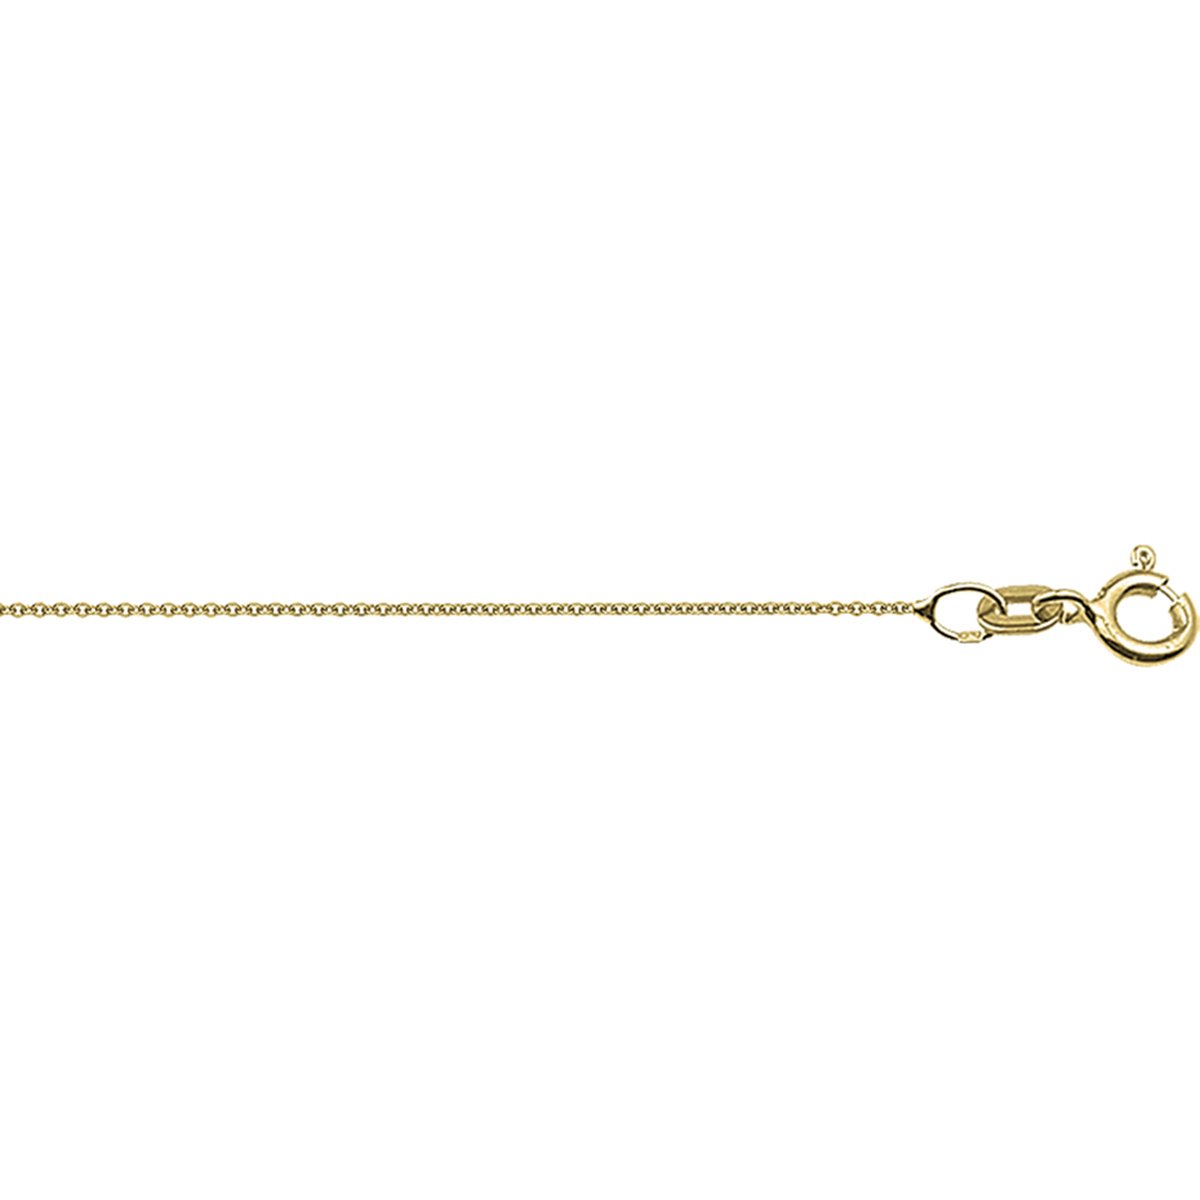 The Jewelry Collection Ketting Anker Rond 0,8 mm 45 cm - Goud - The Jewelry Collection